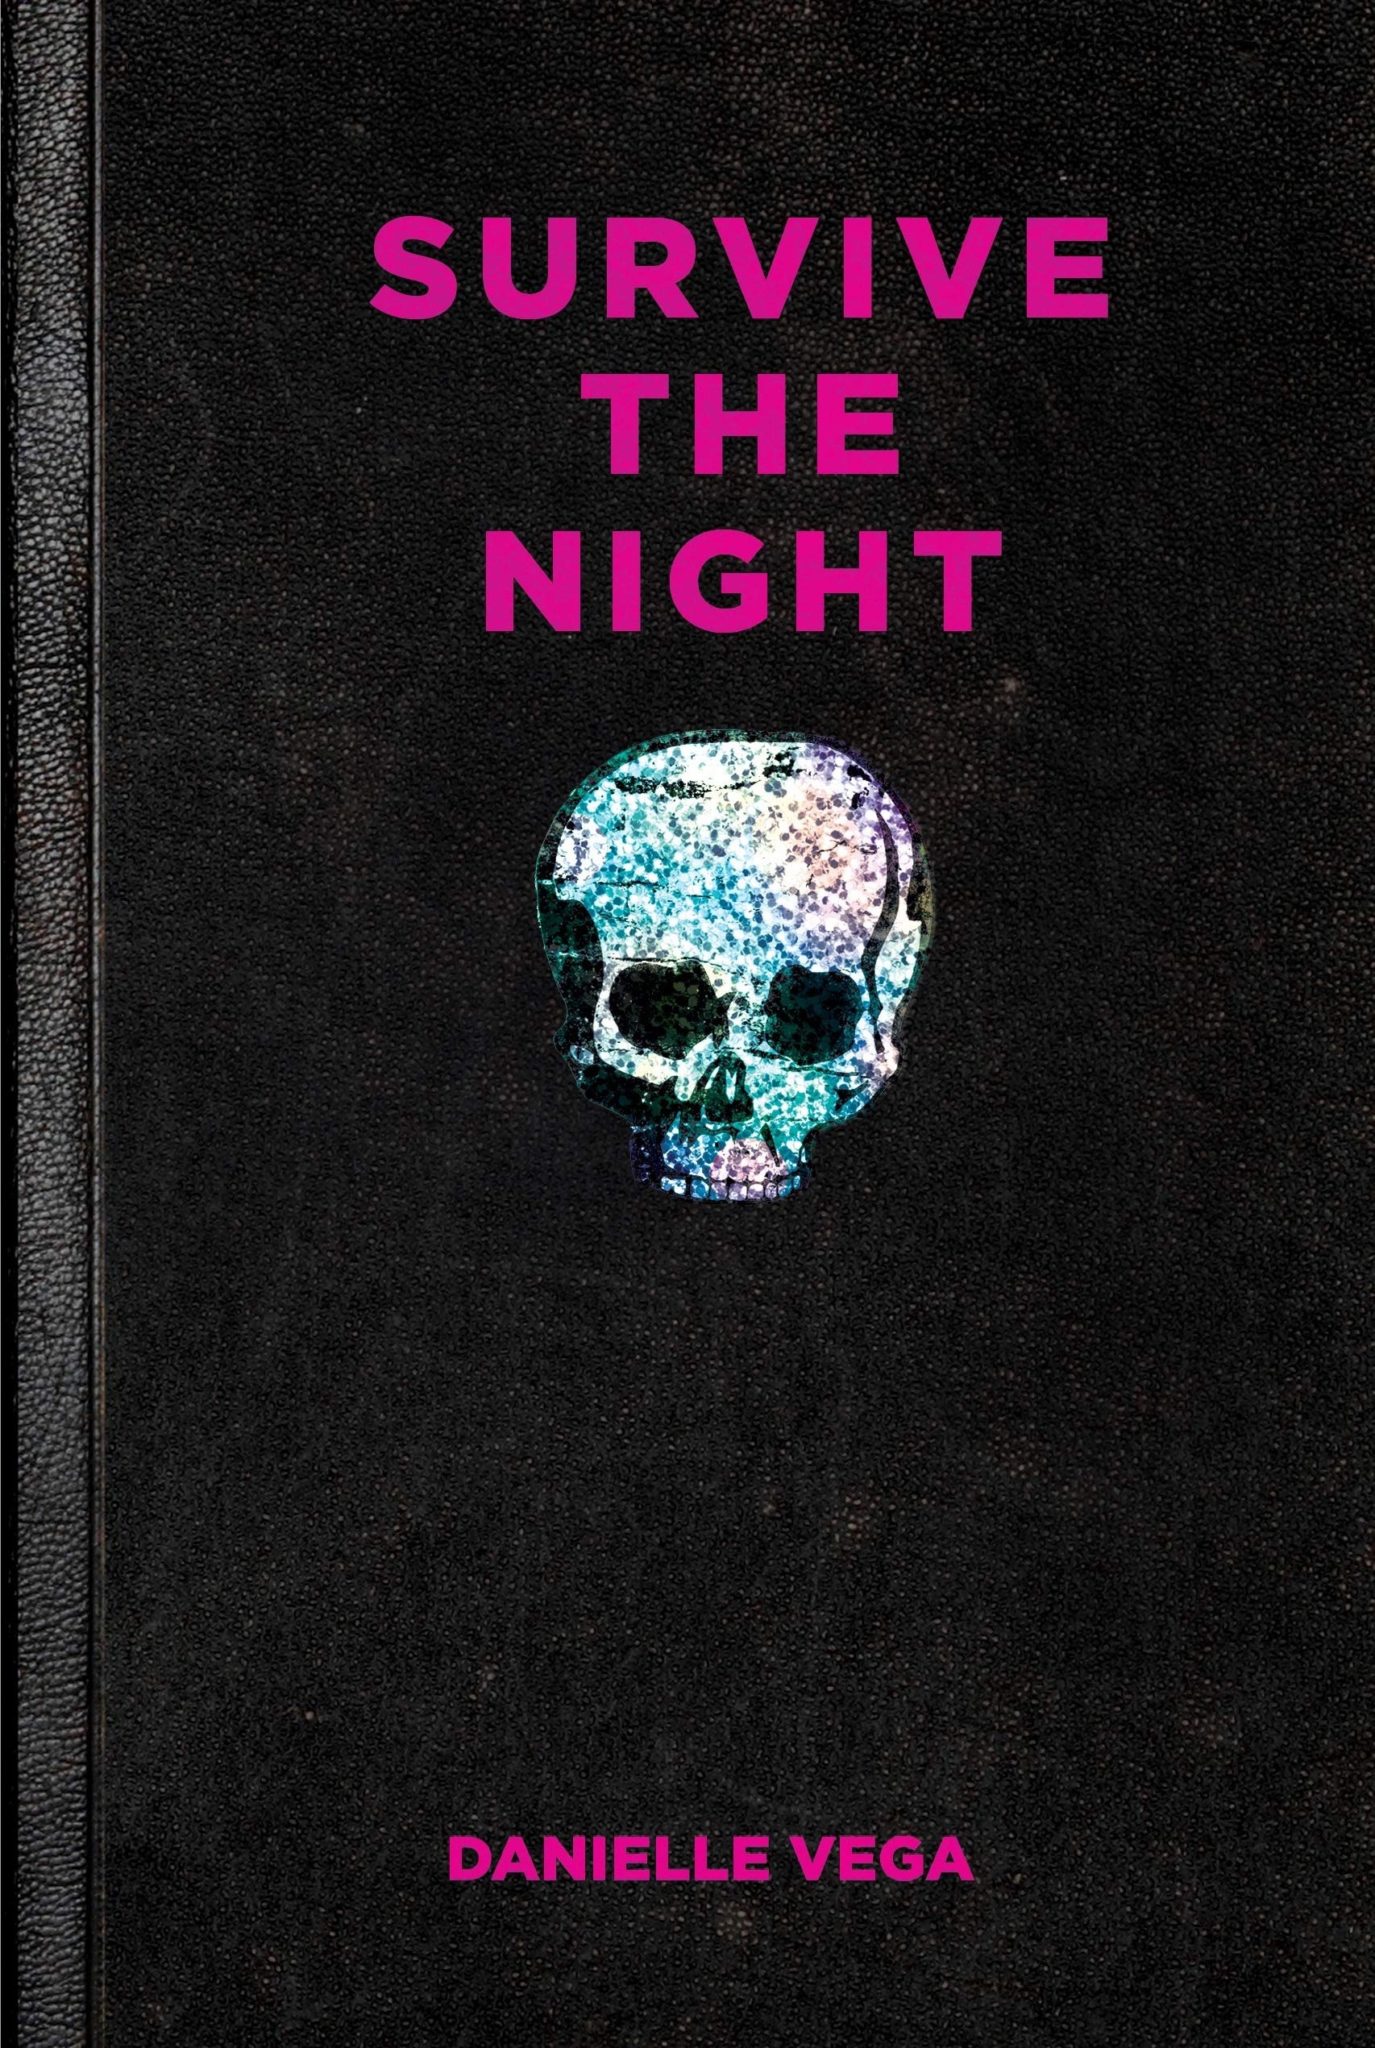 book review of night